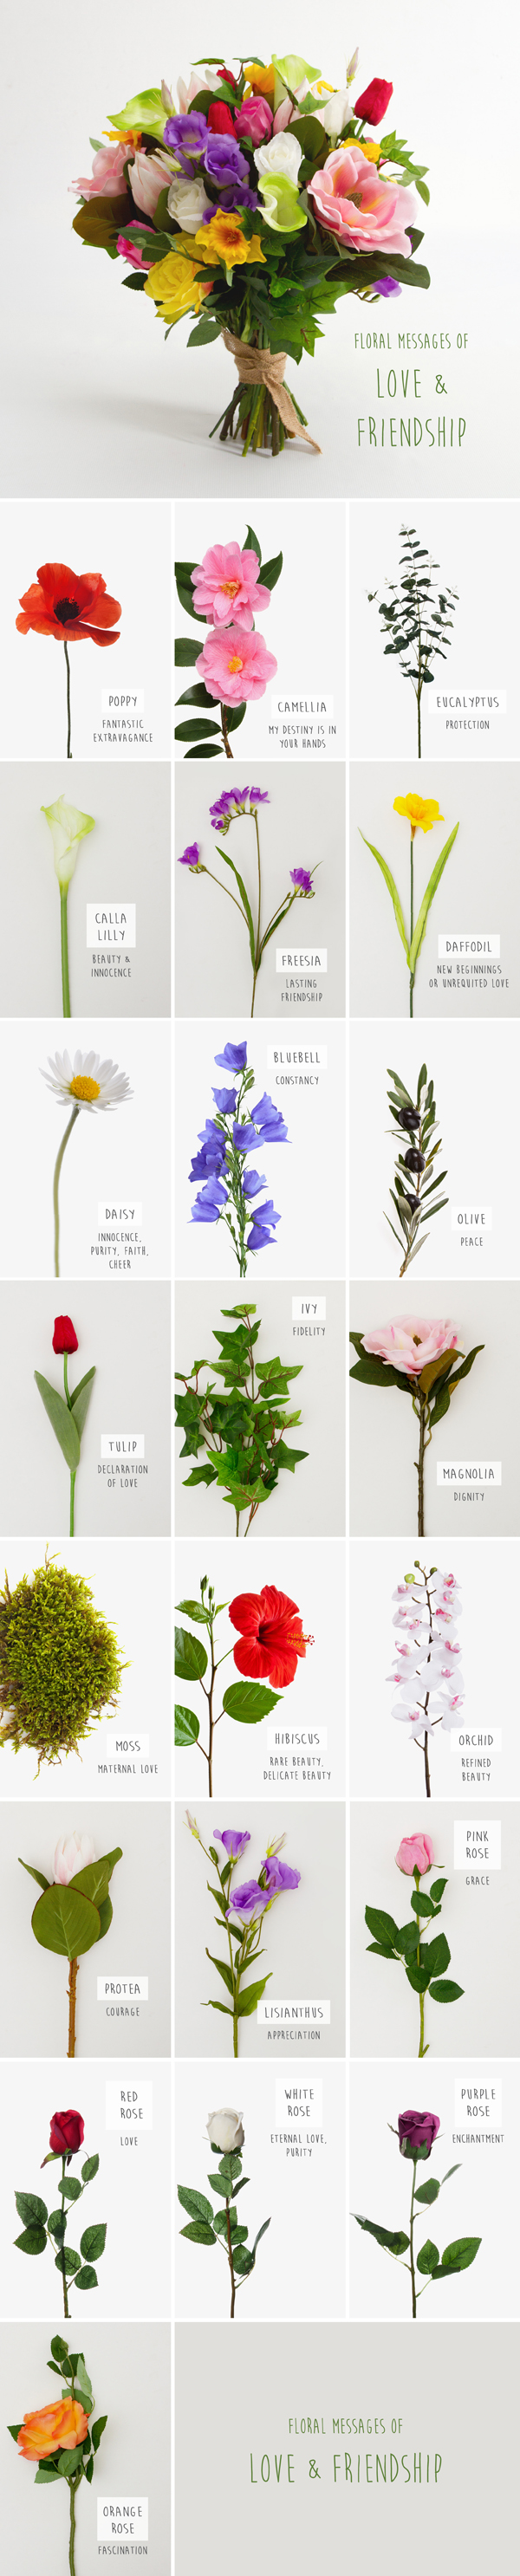 Floriography Chart of Flowers